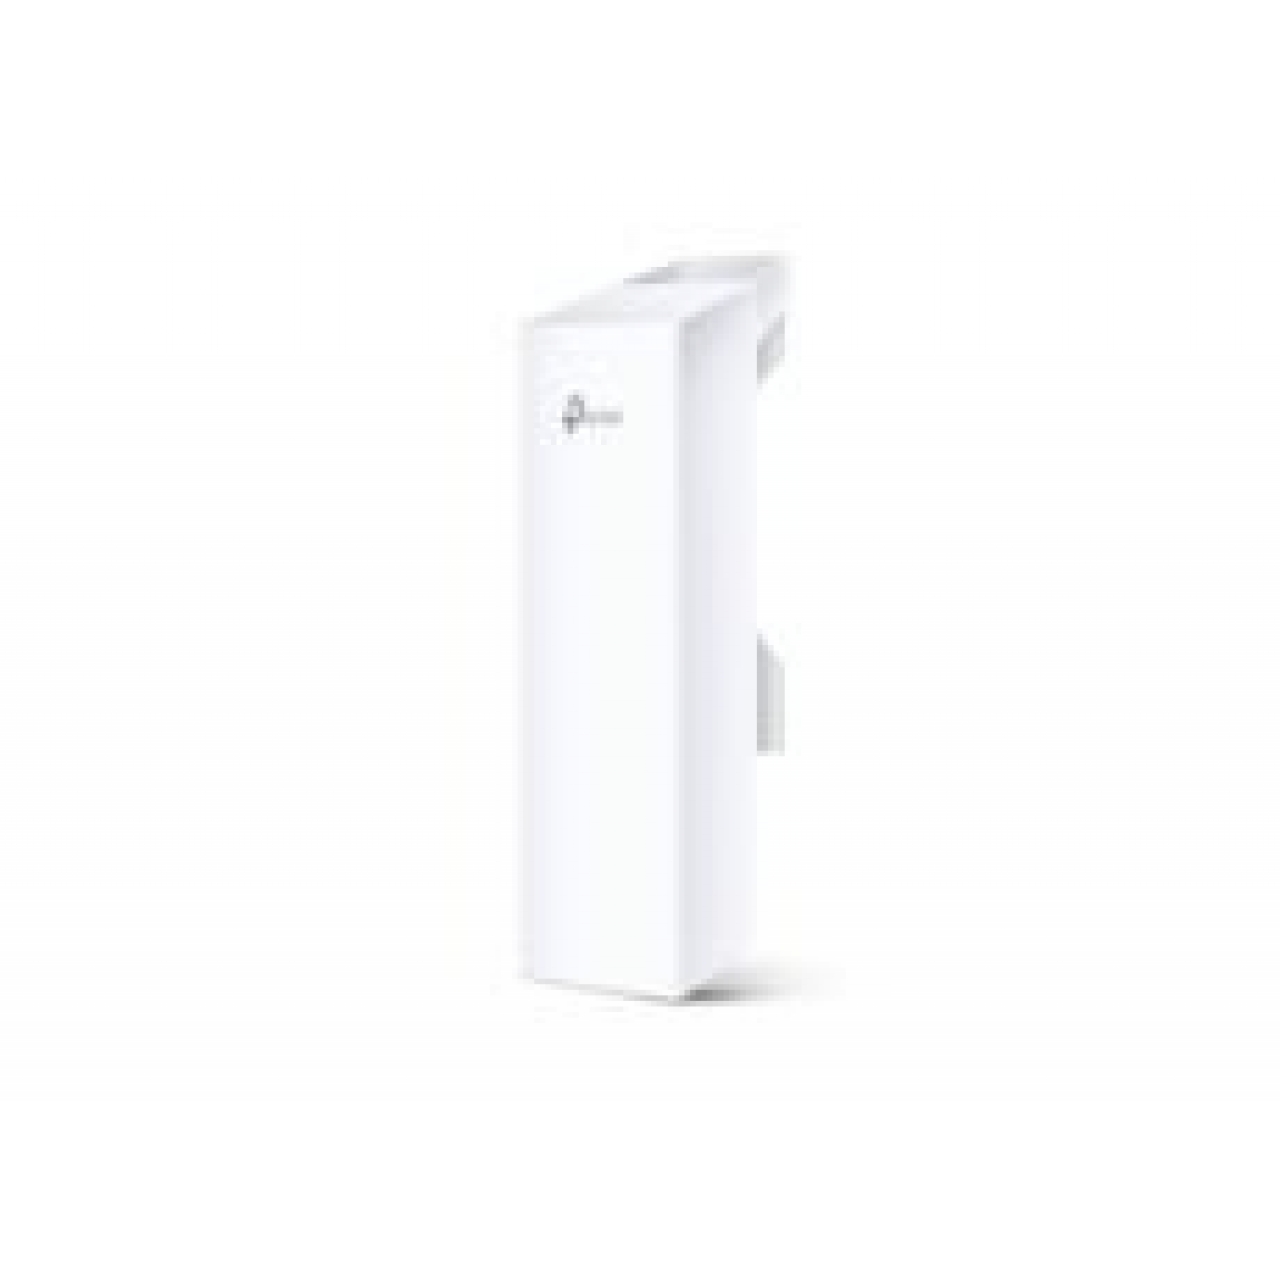 TP-LINK CPE510 300MBPS 5GHZ OUTDOOR ACCESS POINT